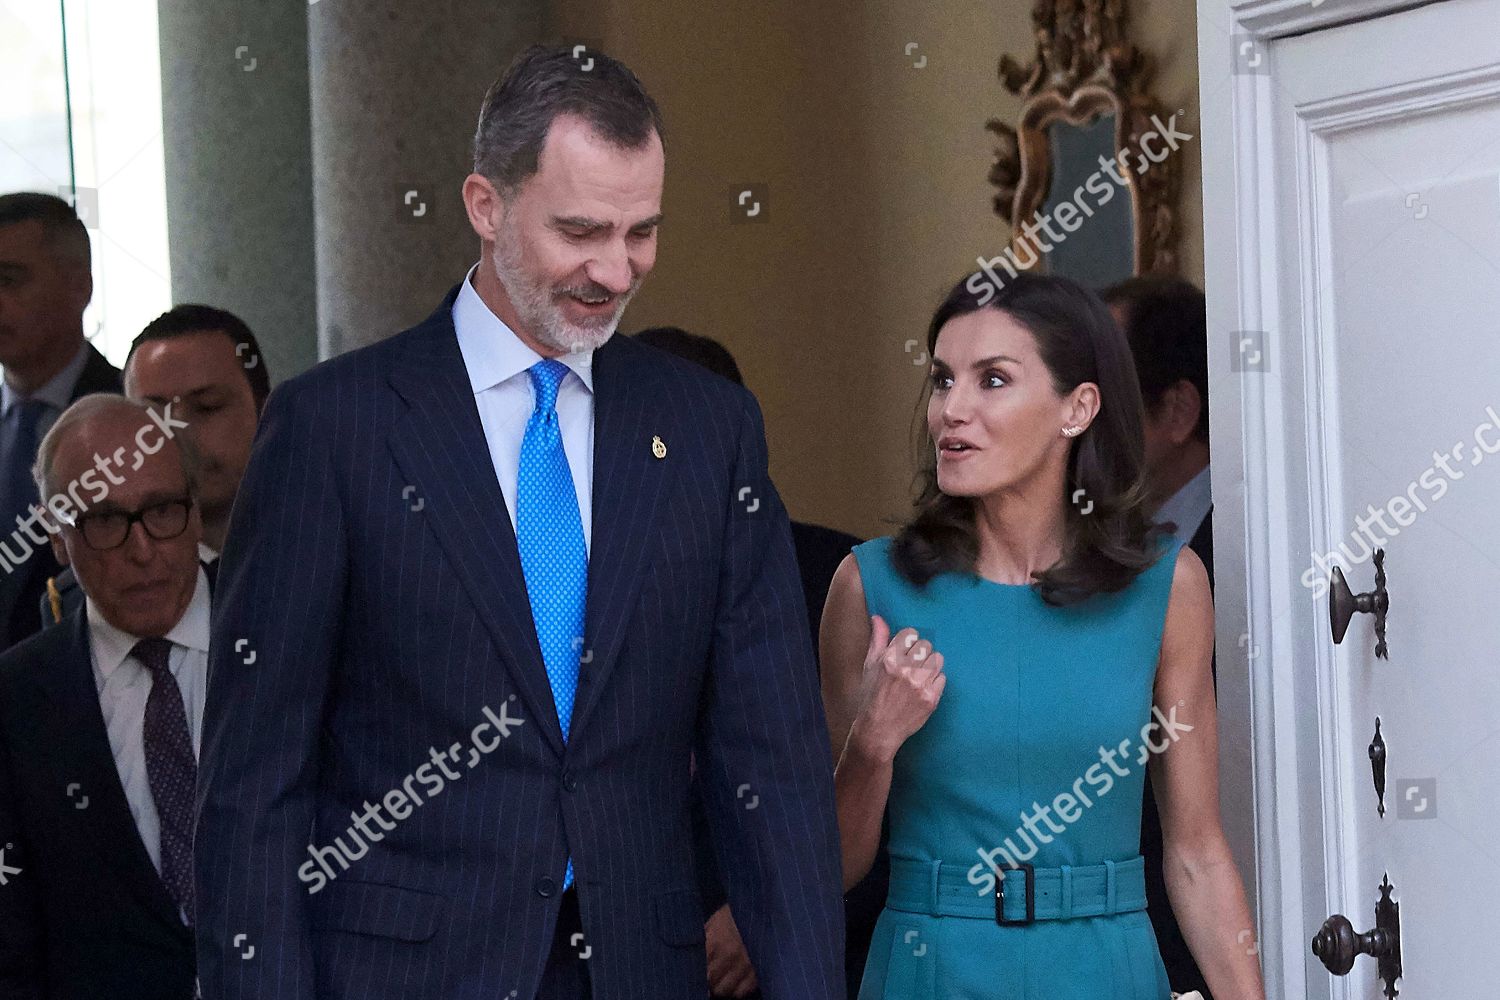 meeting-of-members-of-the-patronages-of-the-princess-of-asturias-foundation-madrid-spain-shutterstock-editorial-10321808b.jpg